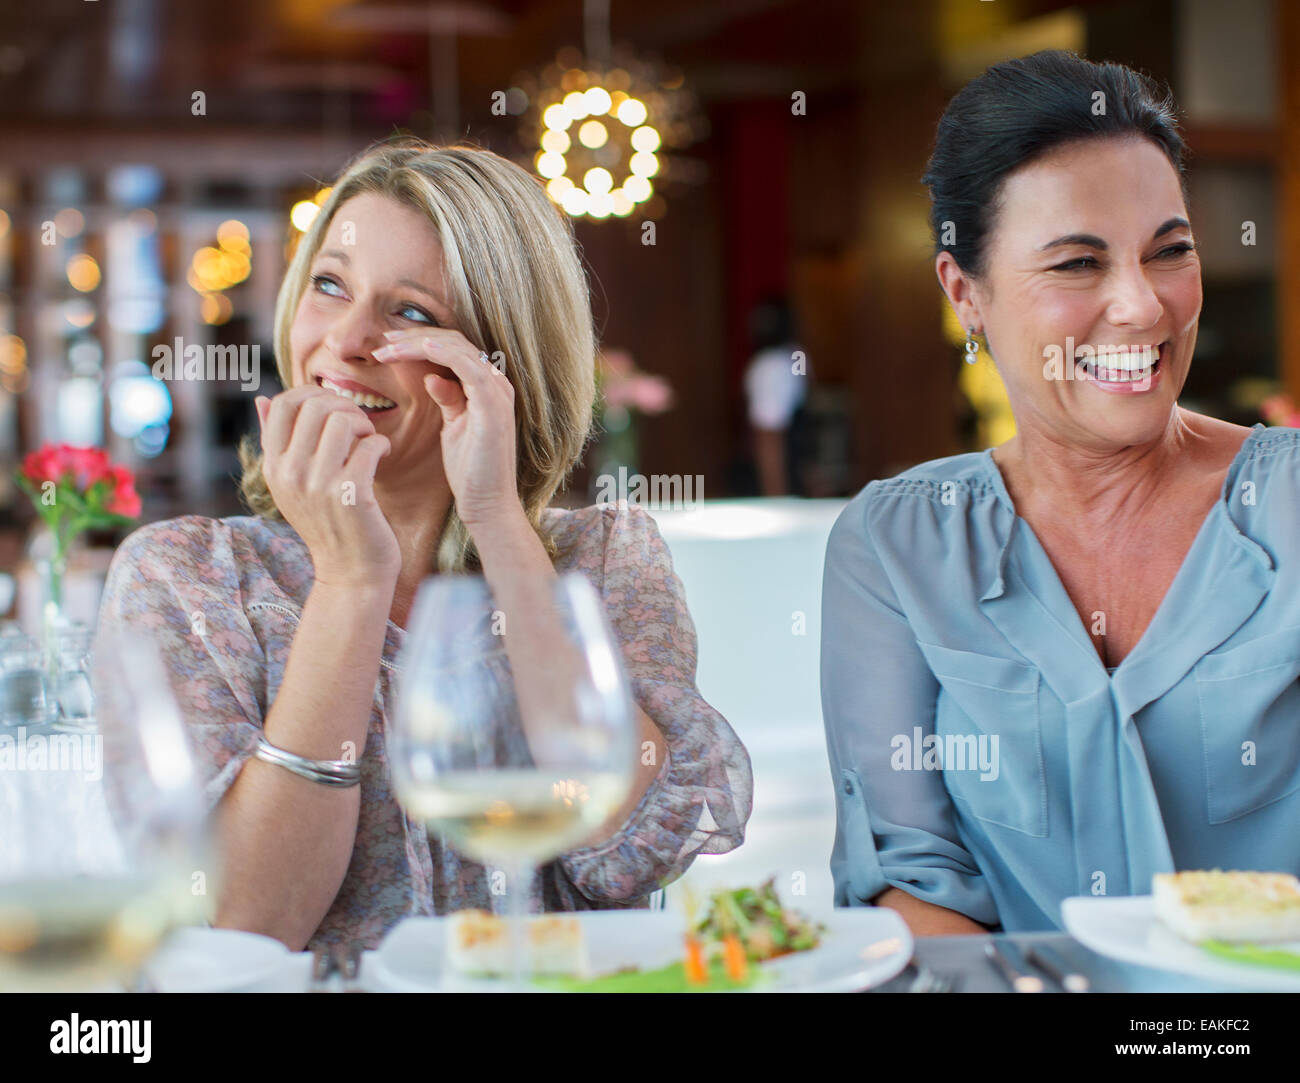 Women laughing at table in restaurant Stock Photo